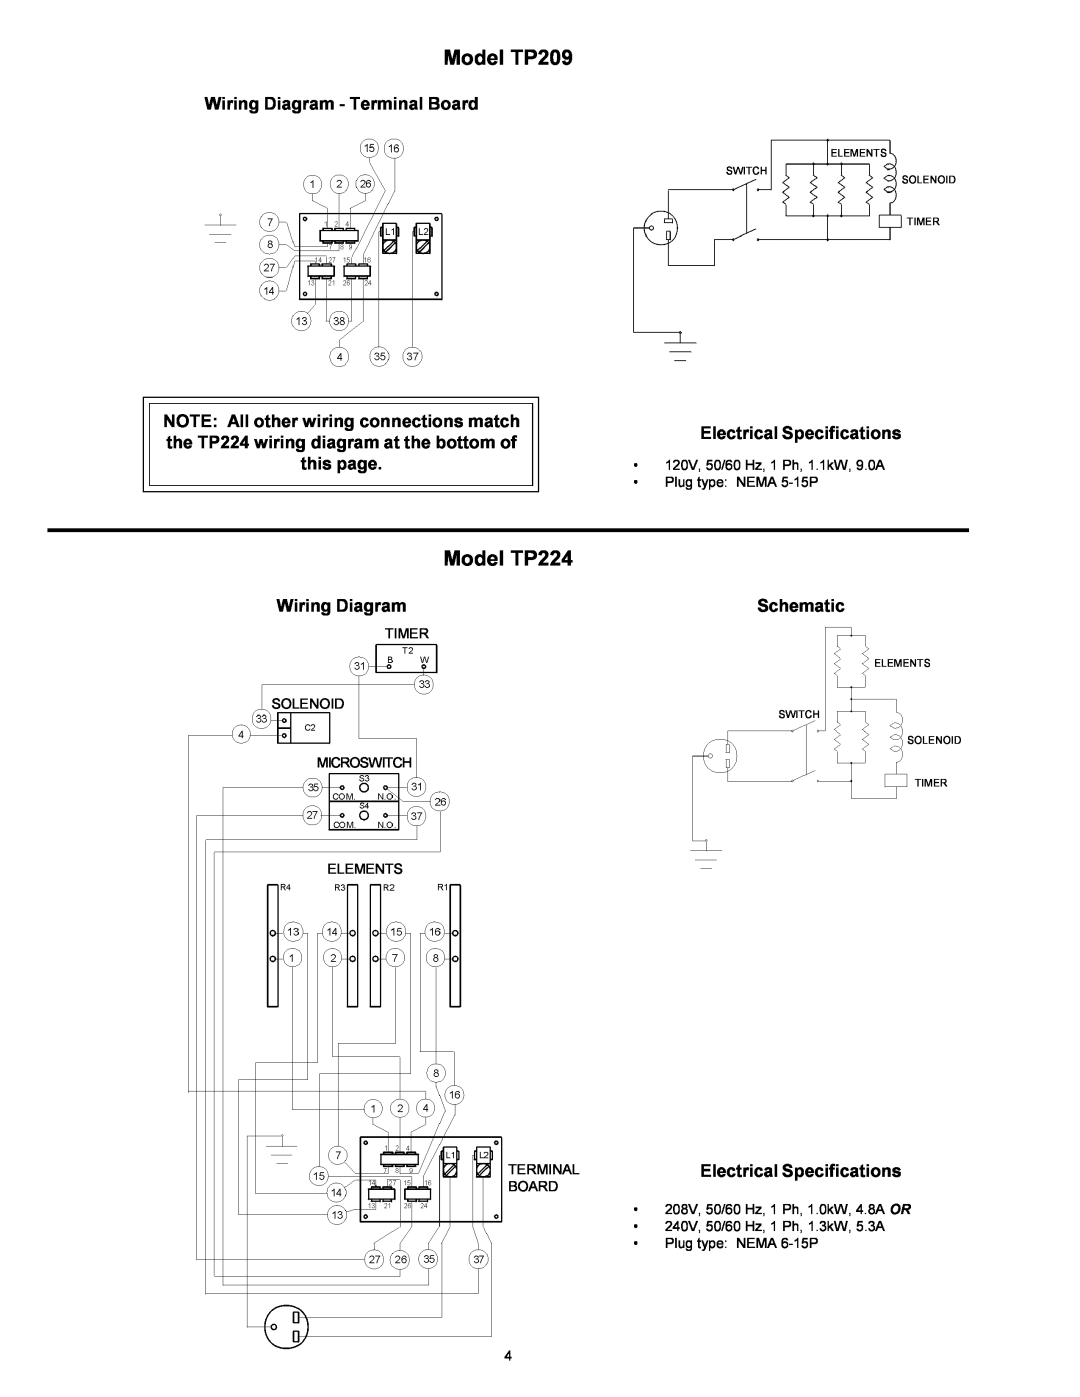 Toastmaster HT424, TP430 Model TP209, Model TP224, Wiring Diagram - Terminal Board, Electrical Specifications, Schematic 